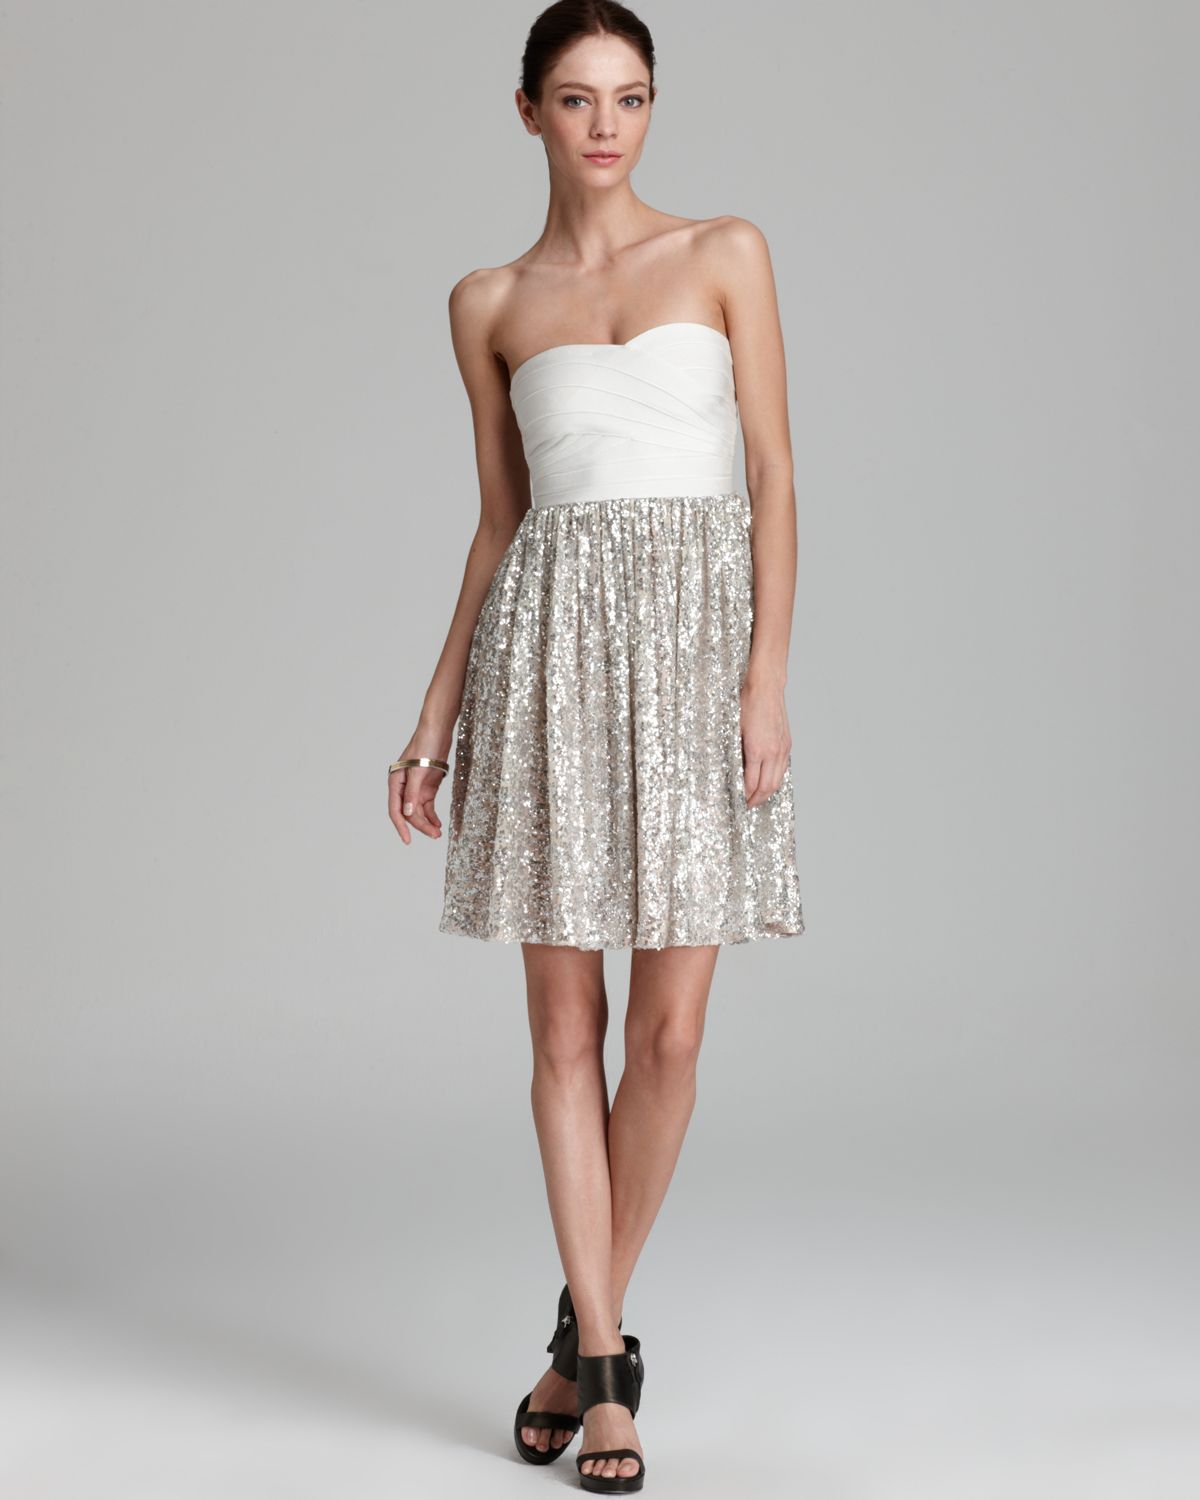 Lyst - Erin Erin Fetherston Dress Strapless Sequin Bandage in Gray